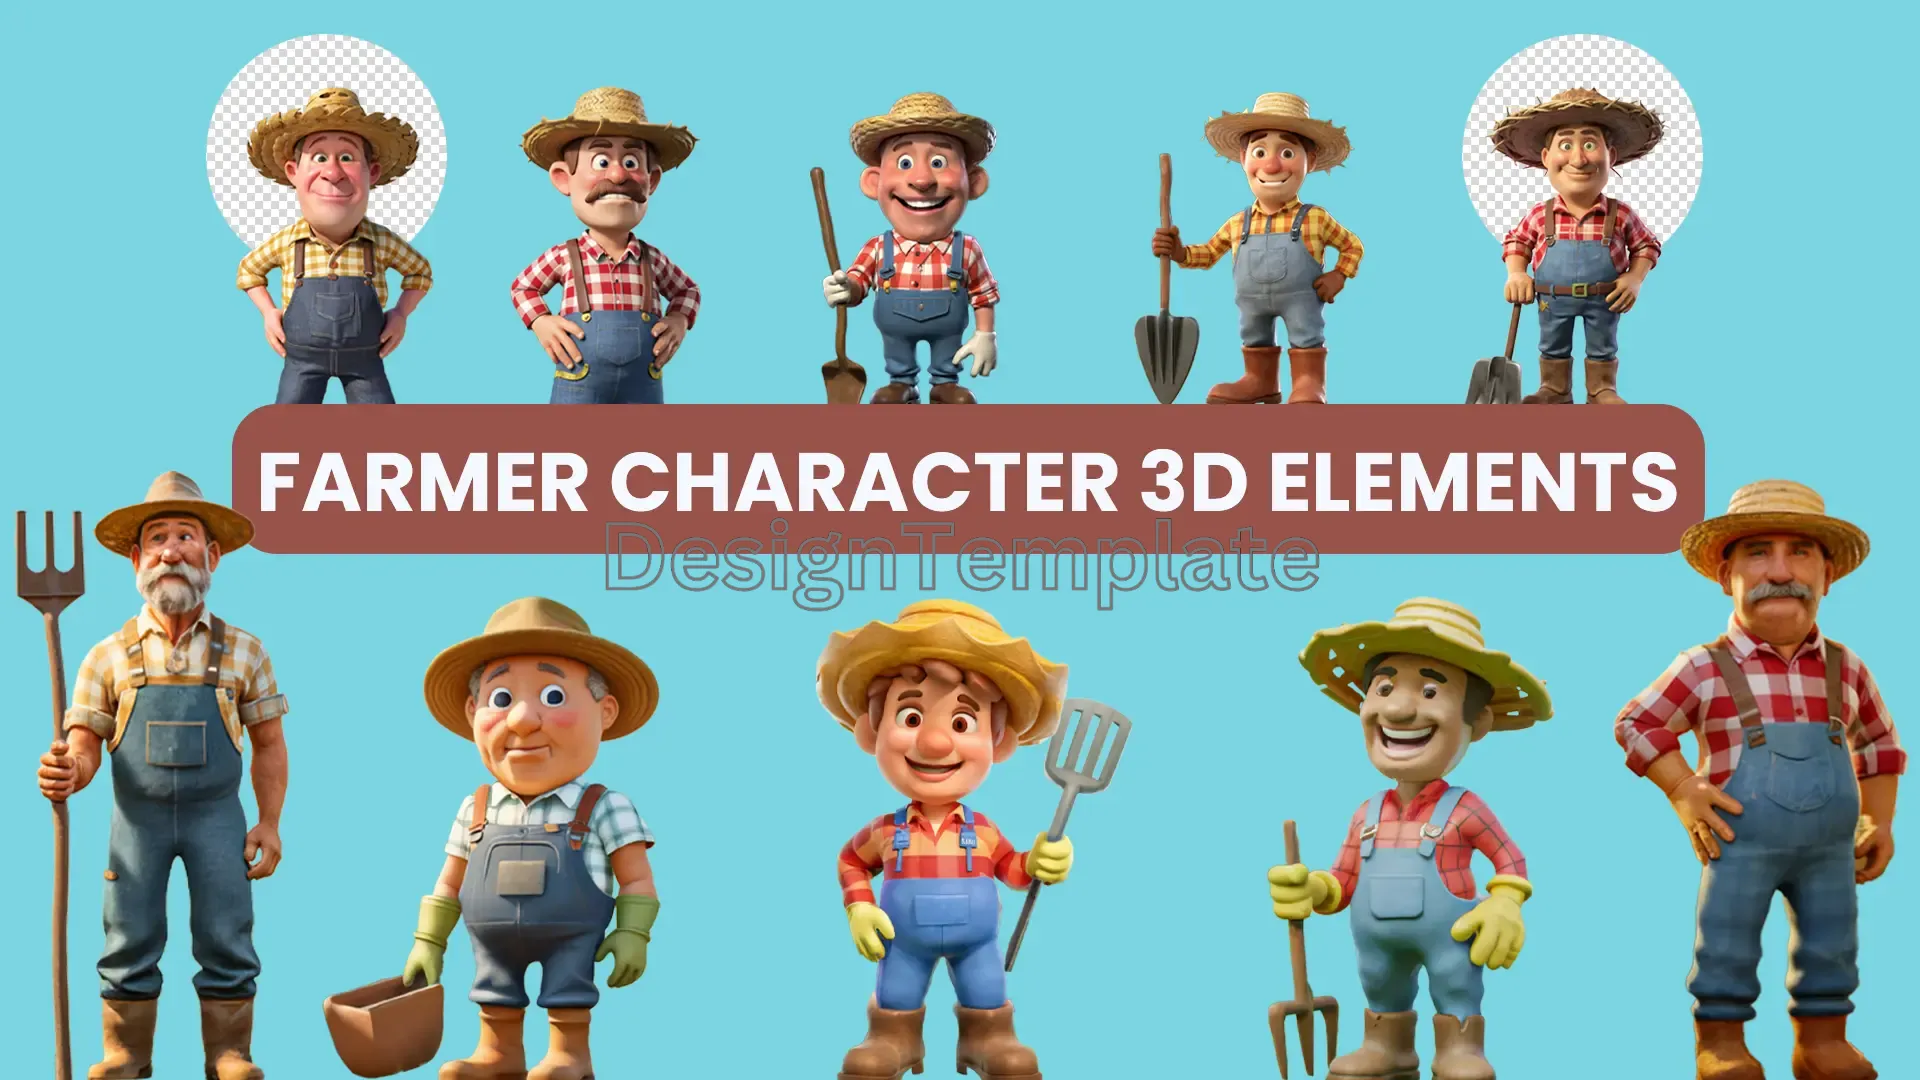 Farm Life Farmer Character 3D Elements Collection image